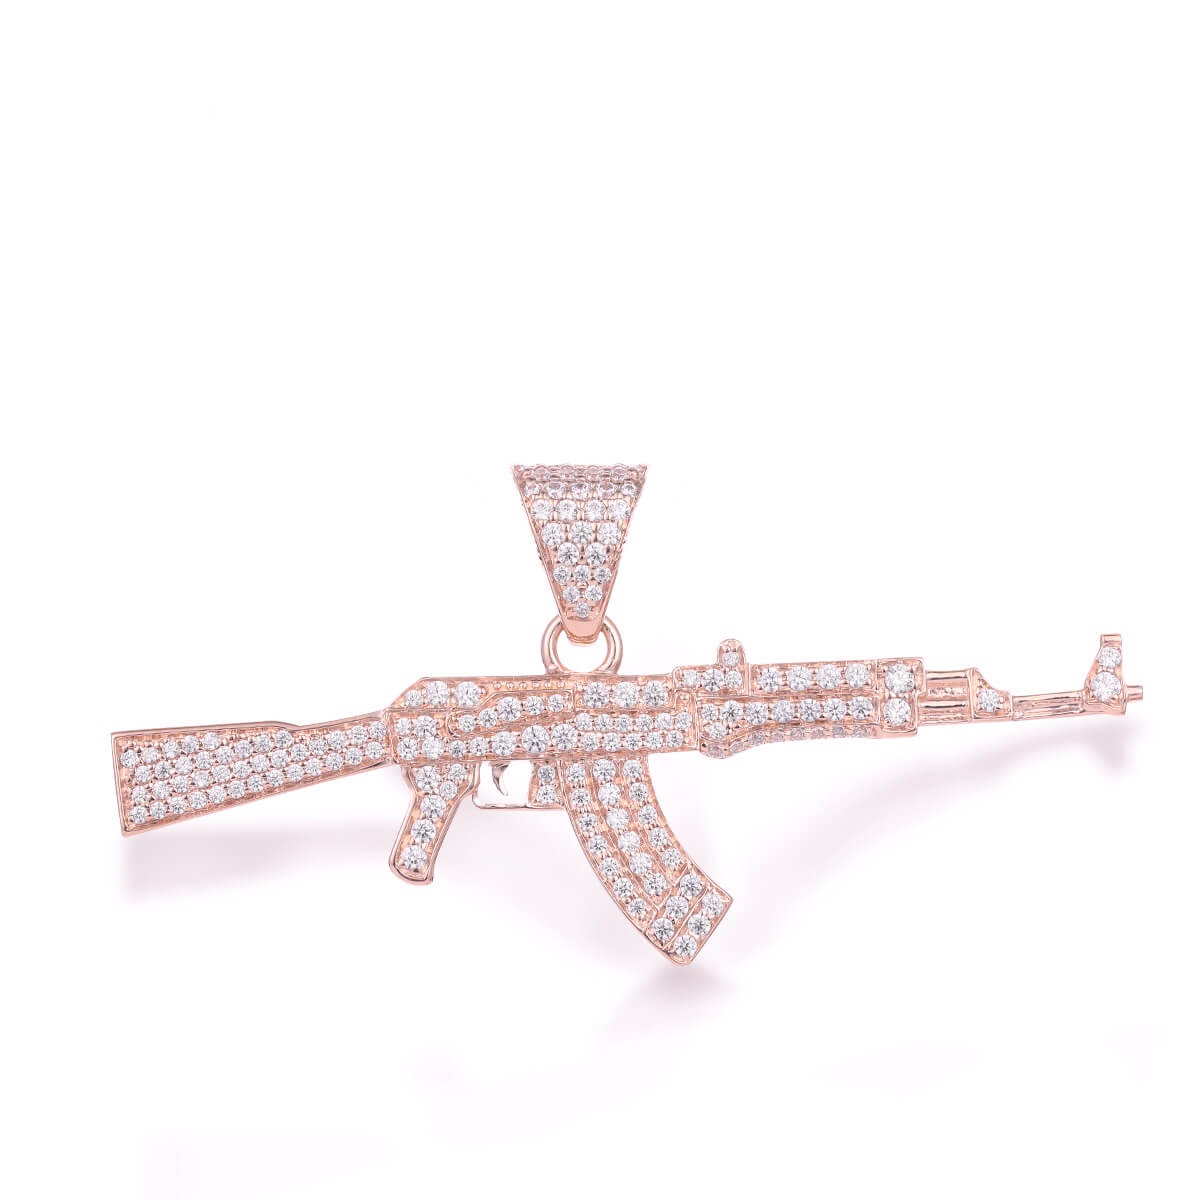 Buy 14k Yellow Gold Small Solid Ak-47 Rifle Pendant Online at SO ICY JEWELRY